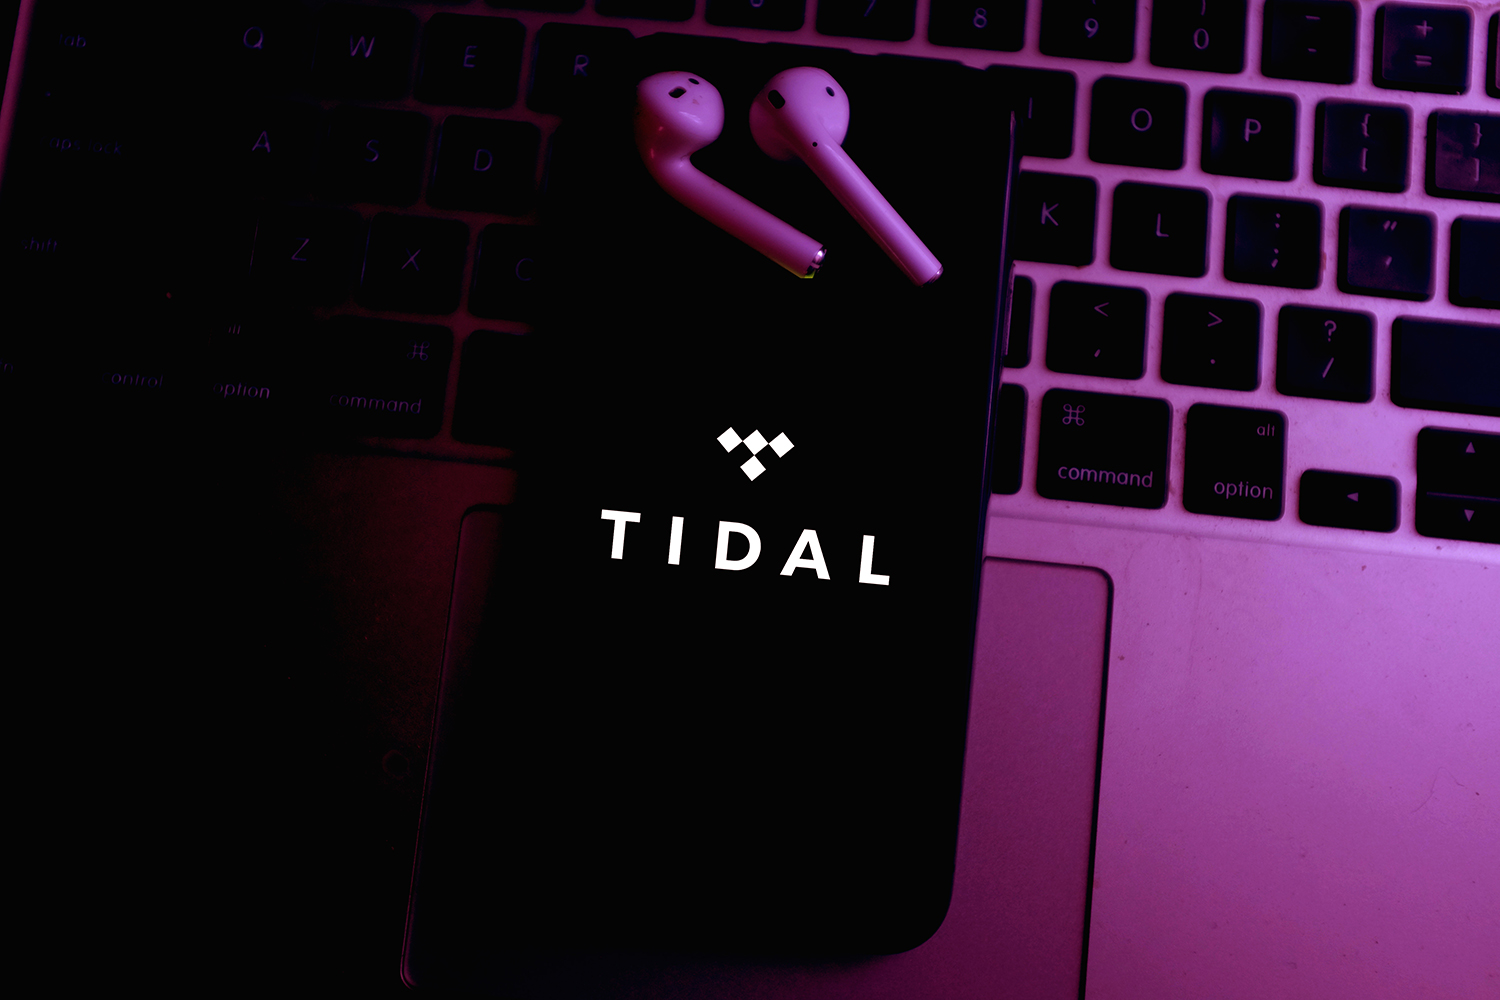 A smartphone with the Tidal logo.